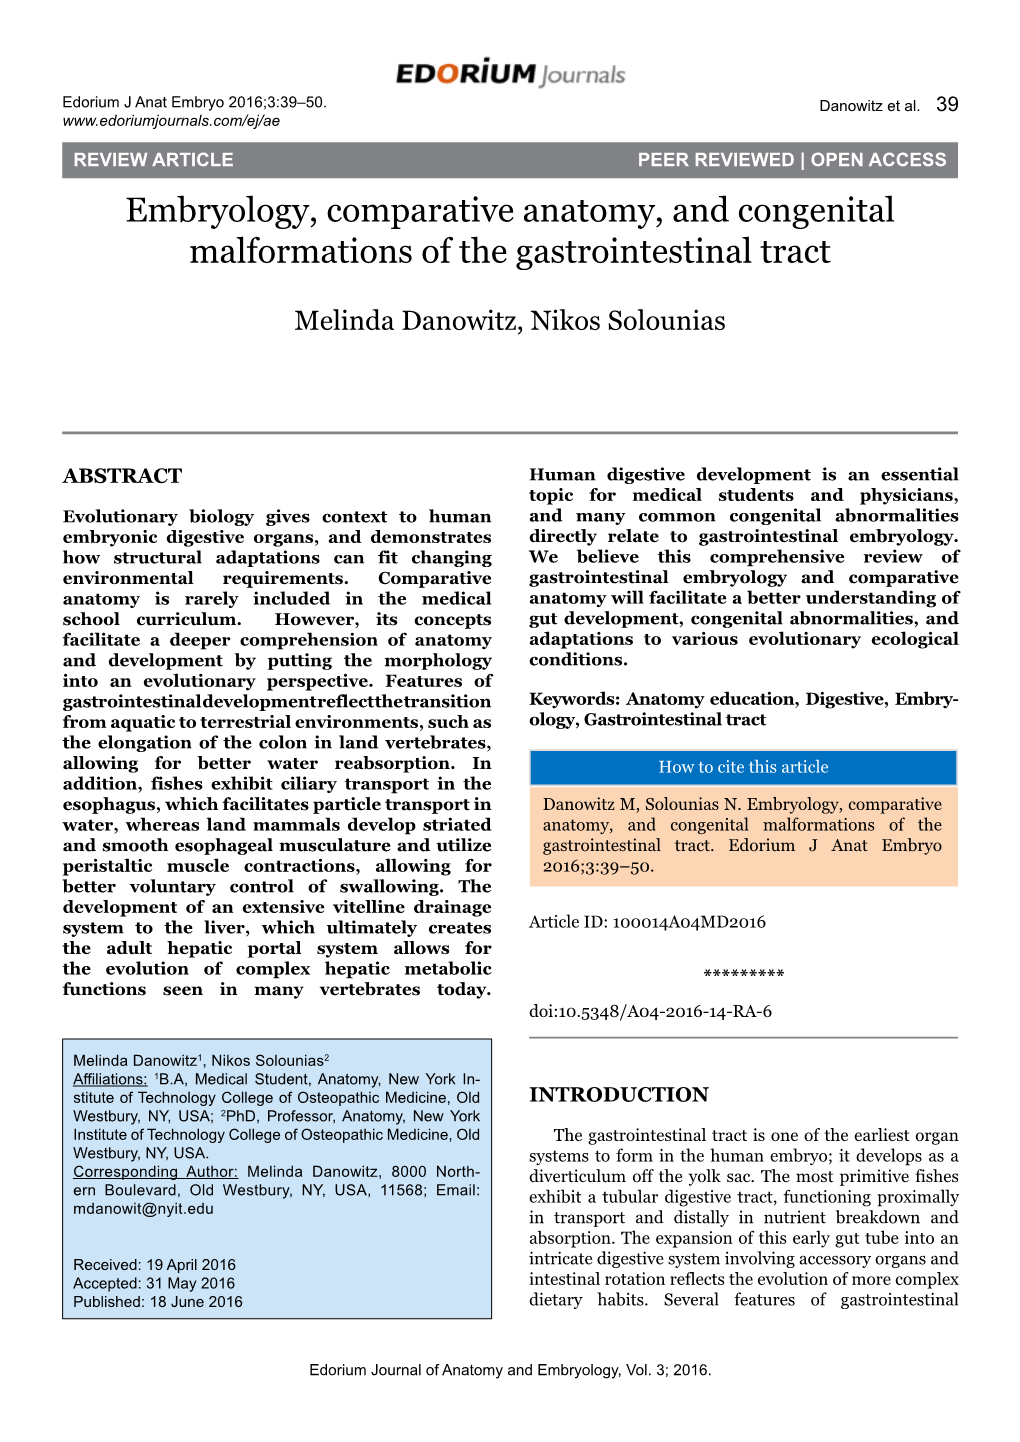 Embryology, Comparative Anatomy, and Congenital Malformations of the Gastrointestinal Tract